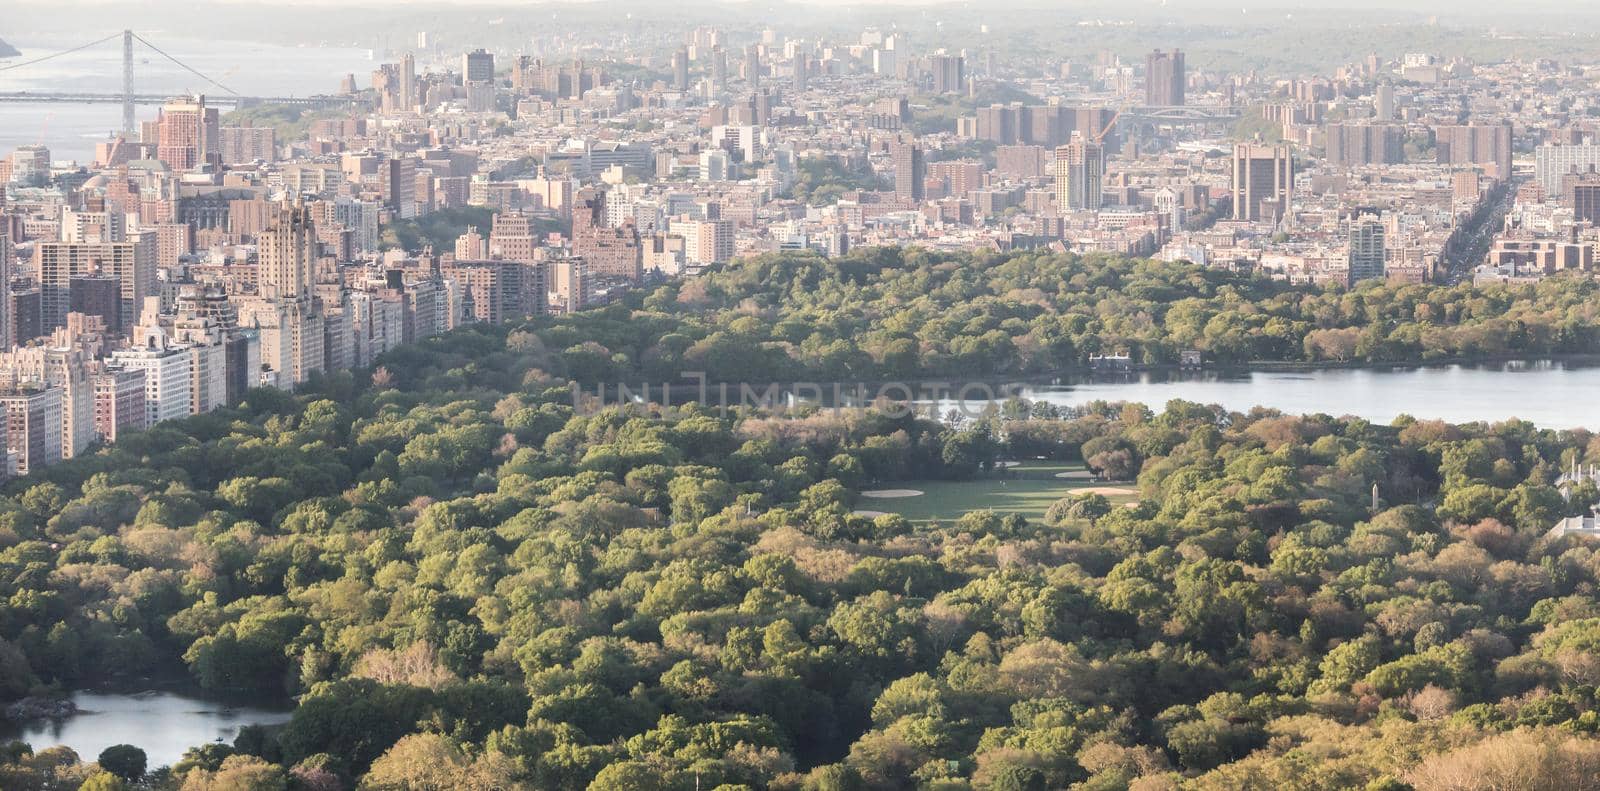 New york, USA - May 17, 2019: Central Park aerial view, Manhattan, New York. Park is surrounded by tall skyscrapers